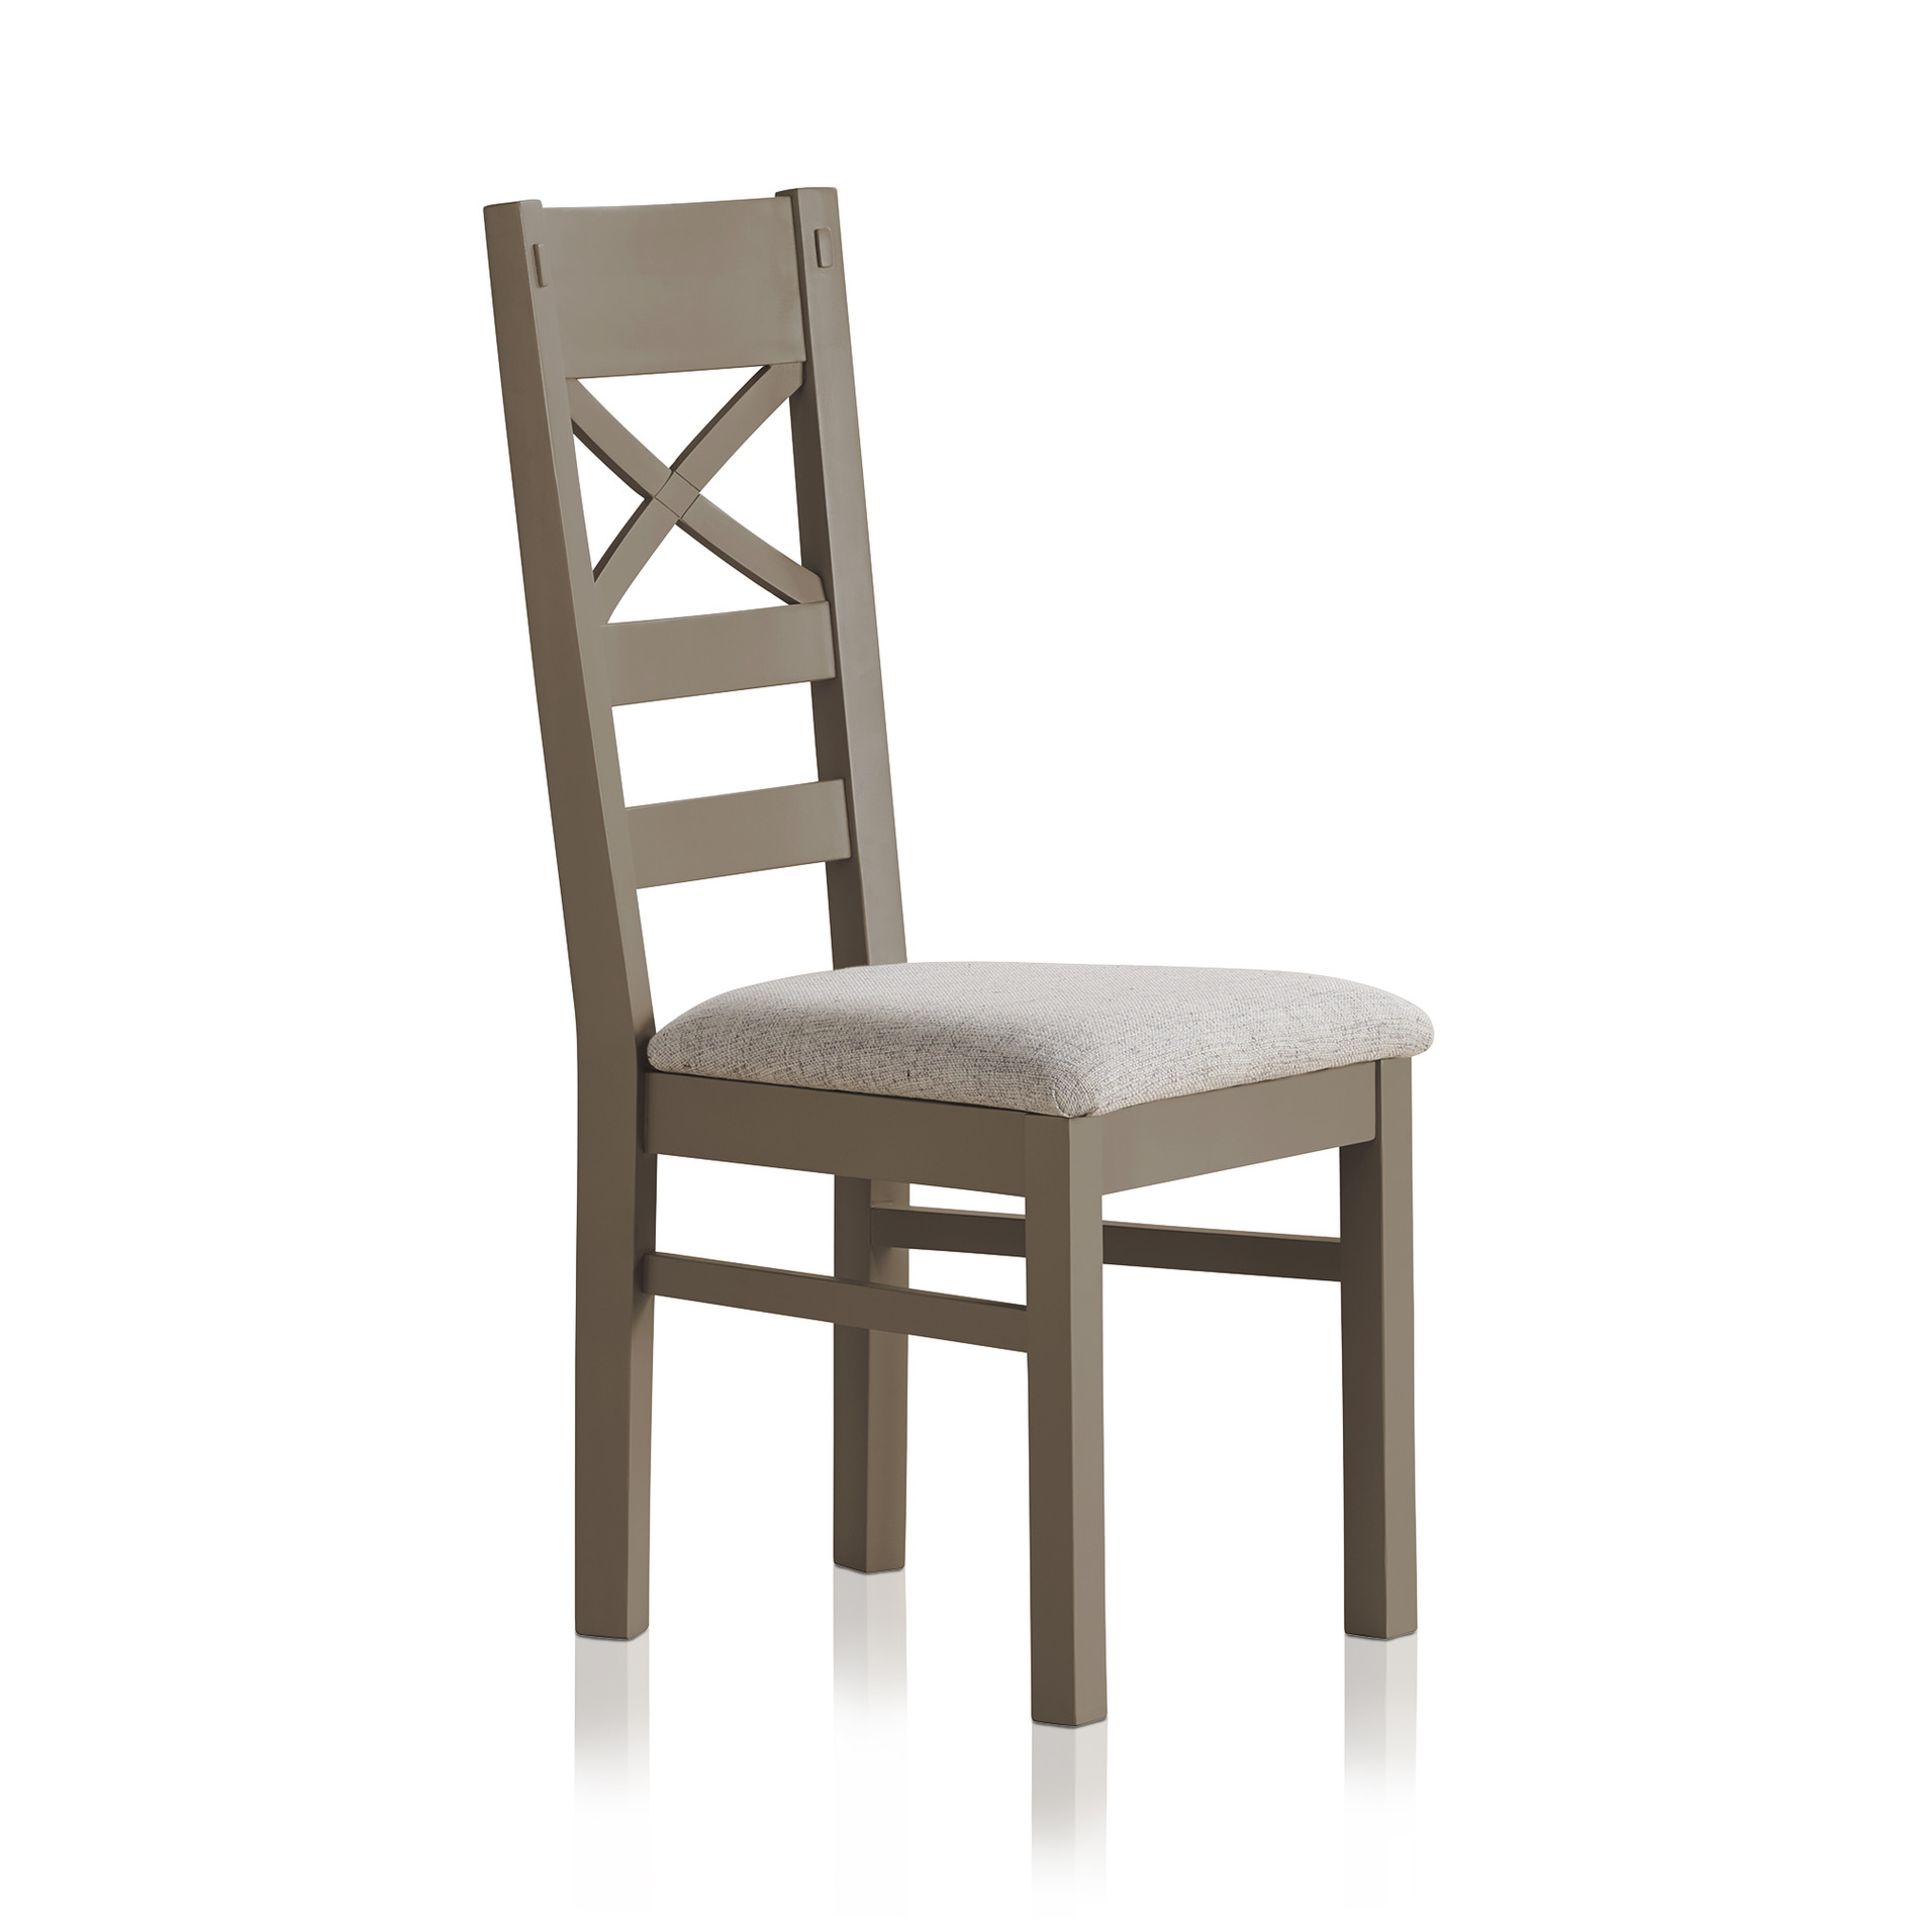 Oak Furnitureland St Ives Light Grey Painted Chair With Plain Grey Fabric Seat RRP 170.00 These